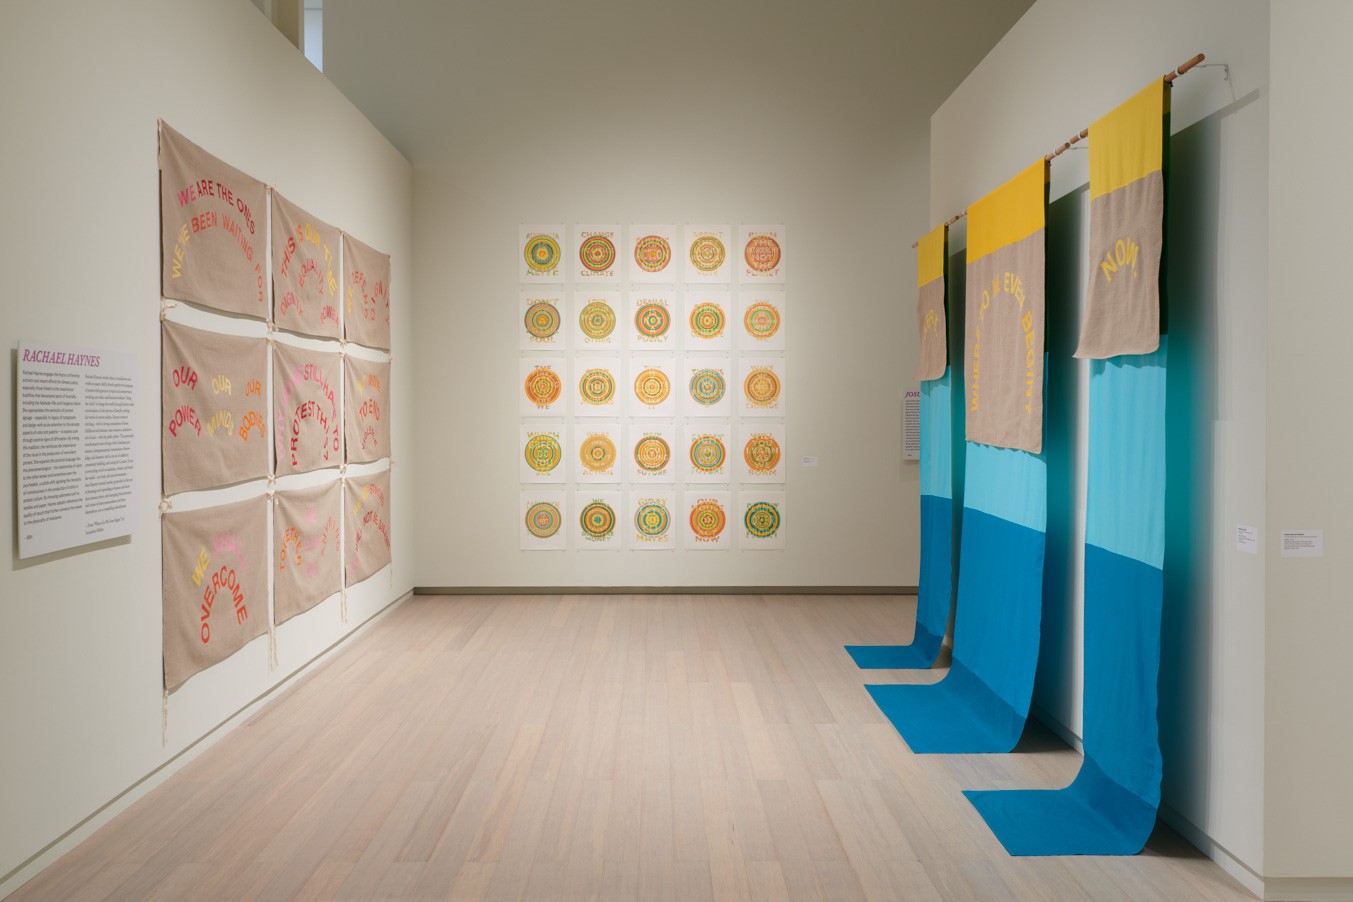 Installation view showing work by the artist Rachael Haynes from the exhibition “The Protest and The Recuperation” on view at the Wallach Art Gallery, Columbia University. Photograph by Kyle Knodell.